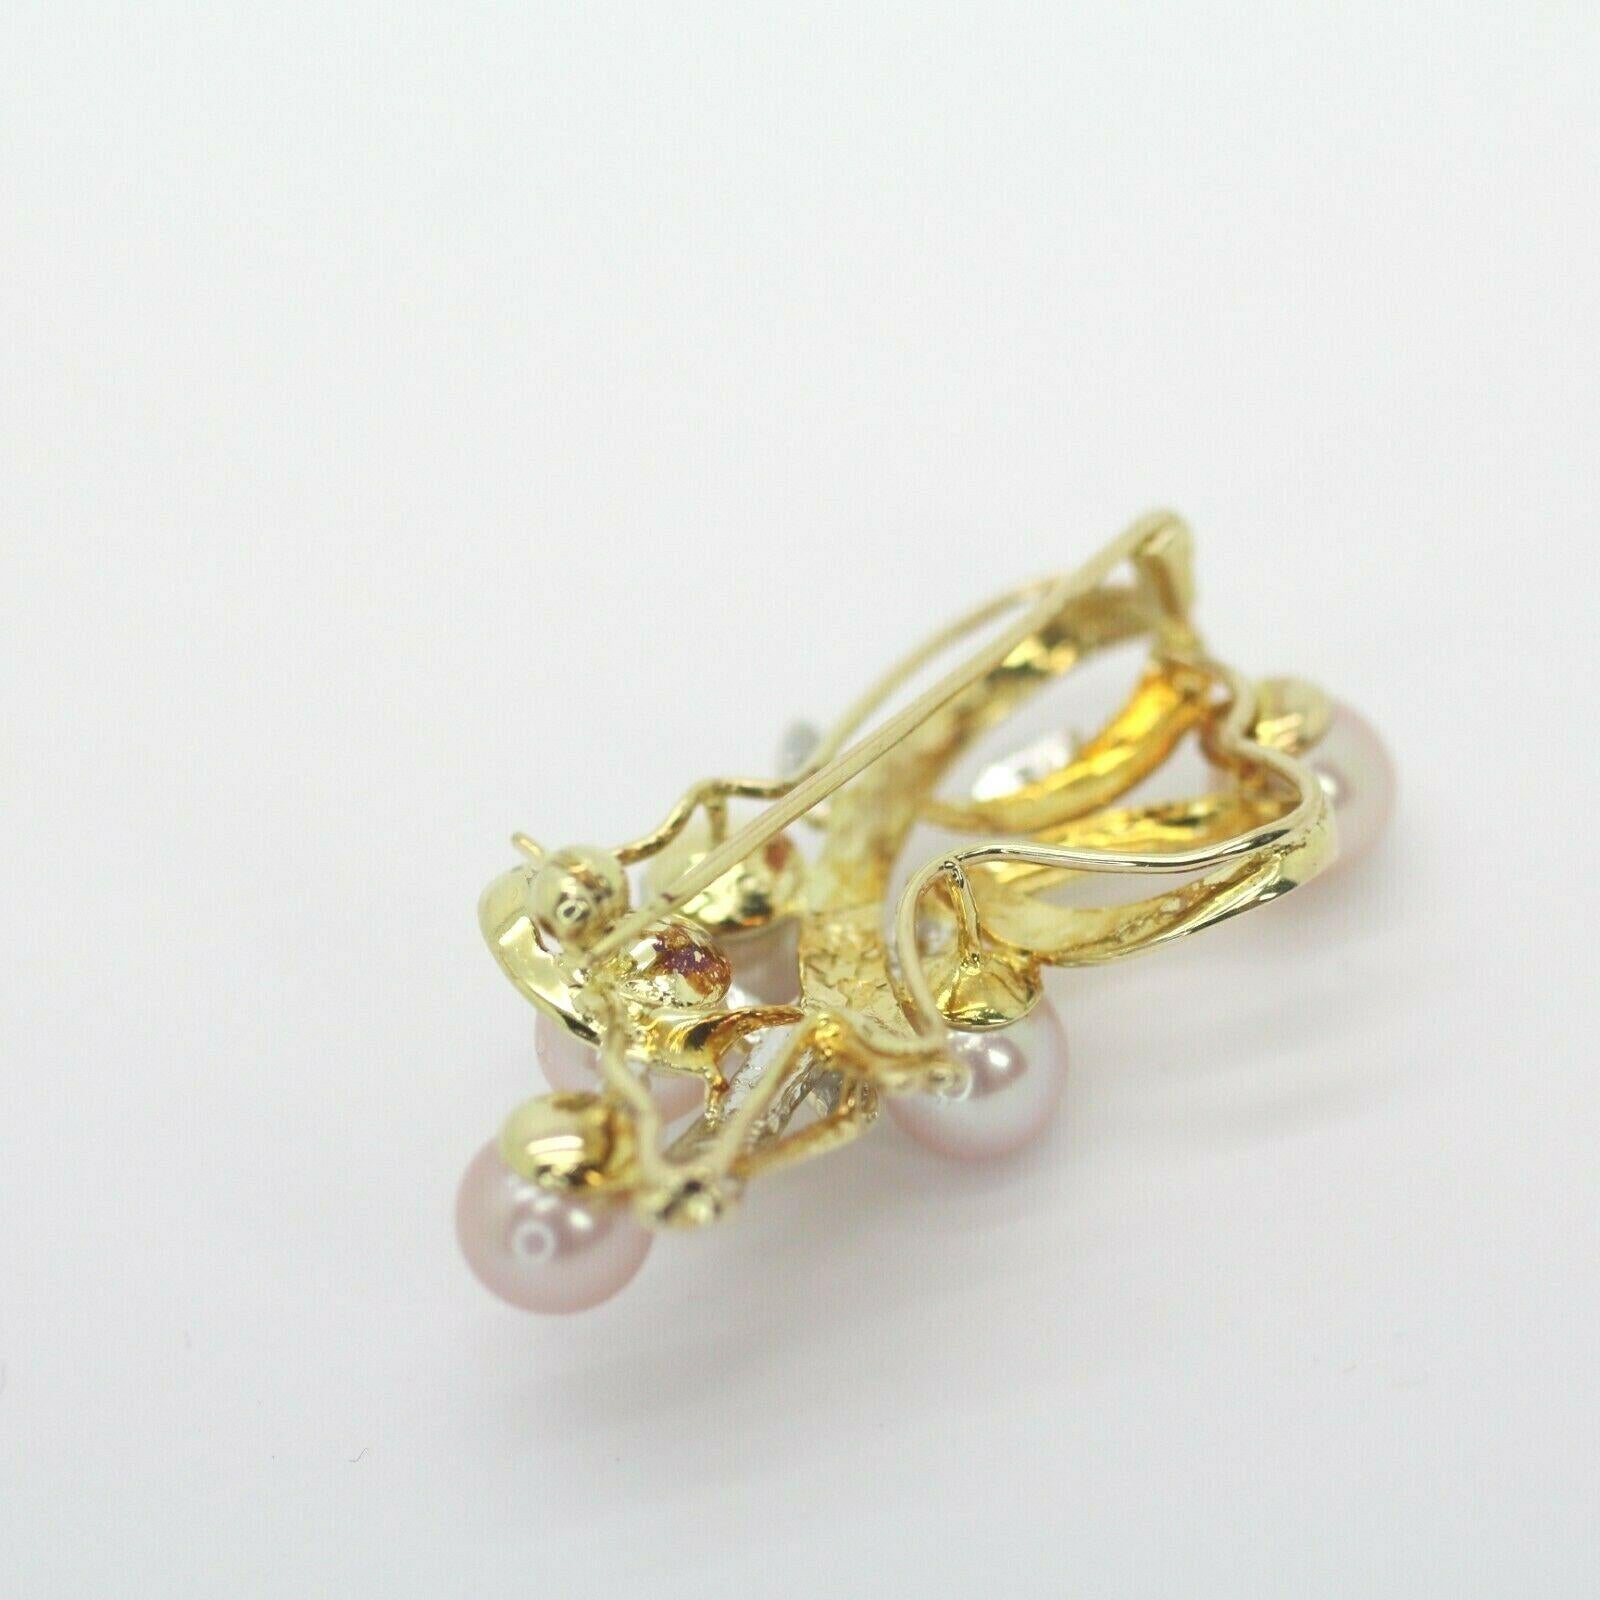 Round Cut 14k Yellow Gold Diamond and Pearl Brooch/Pin